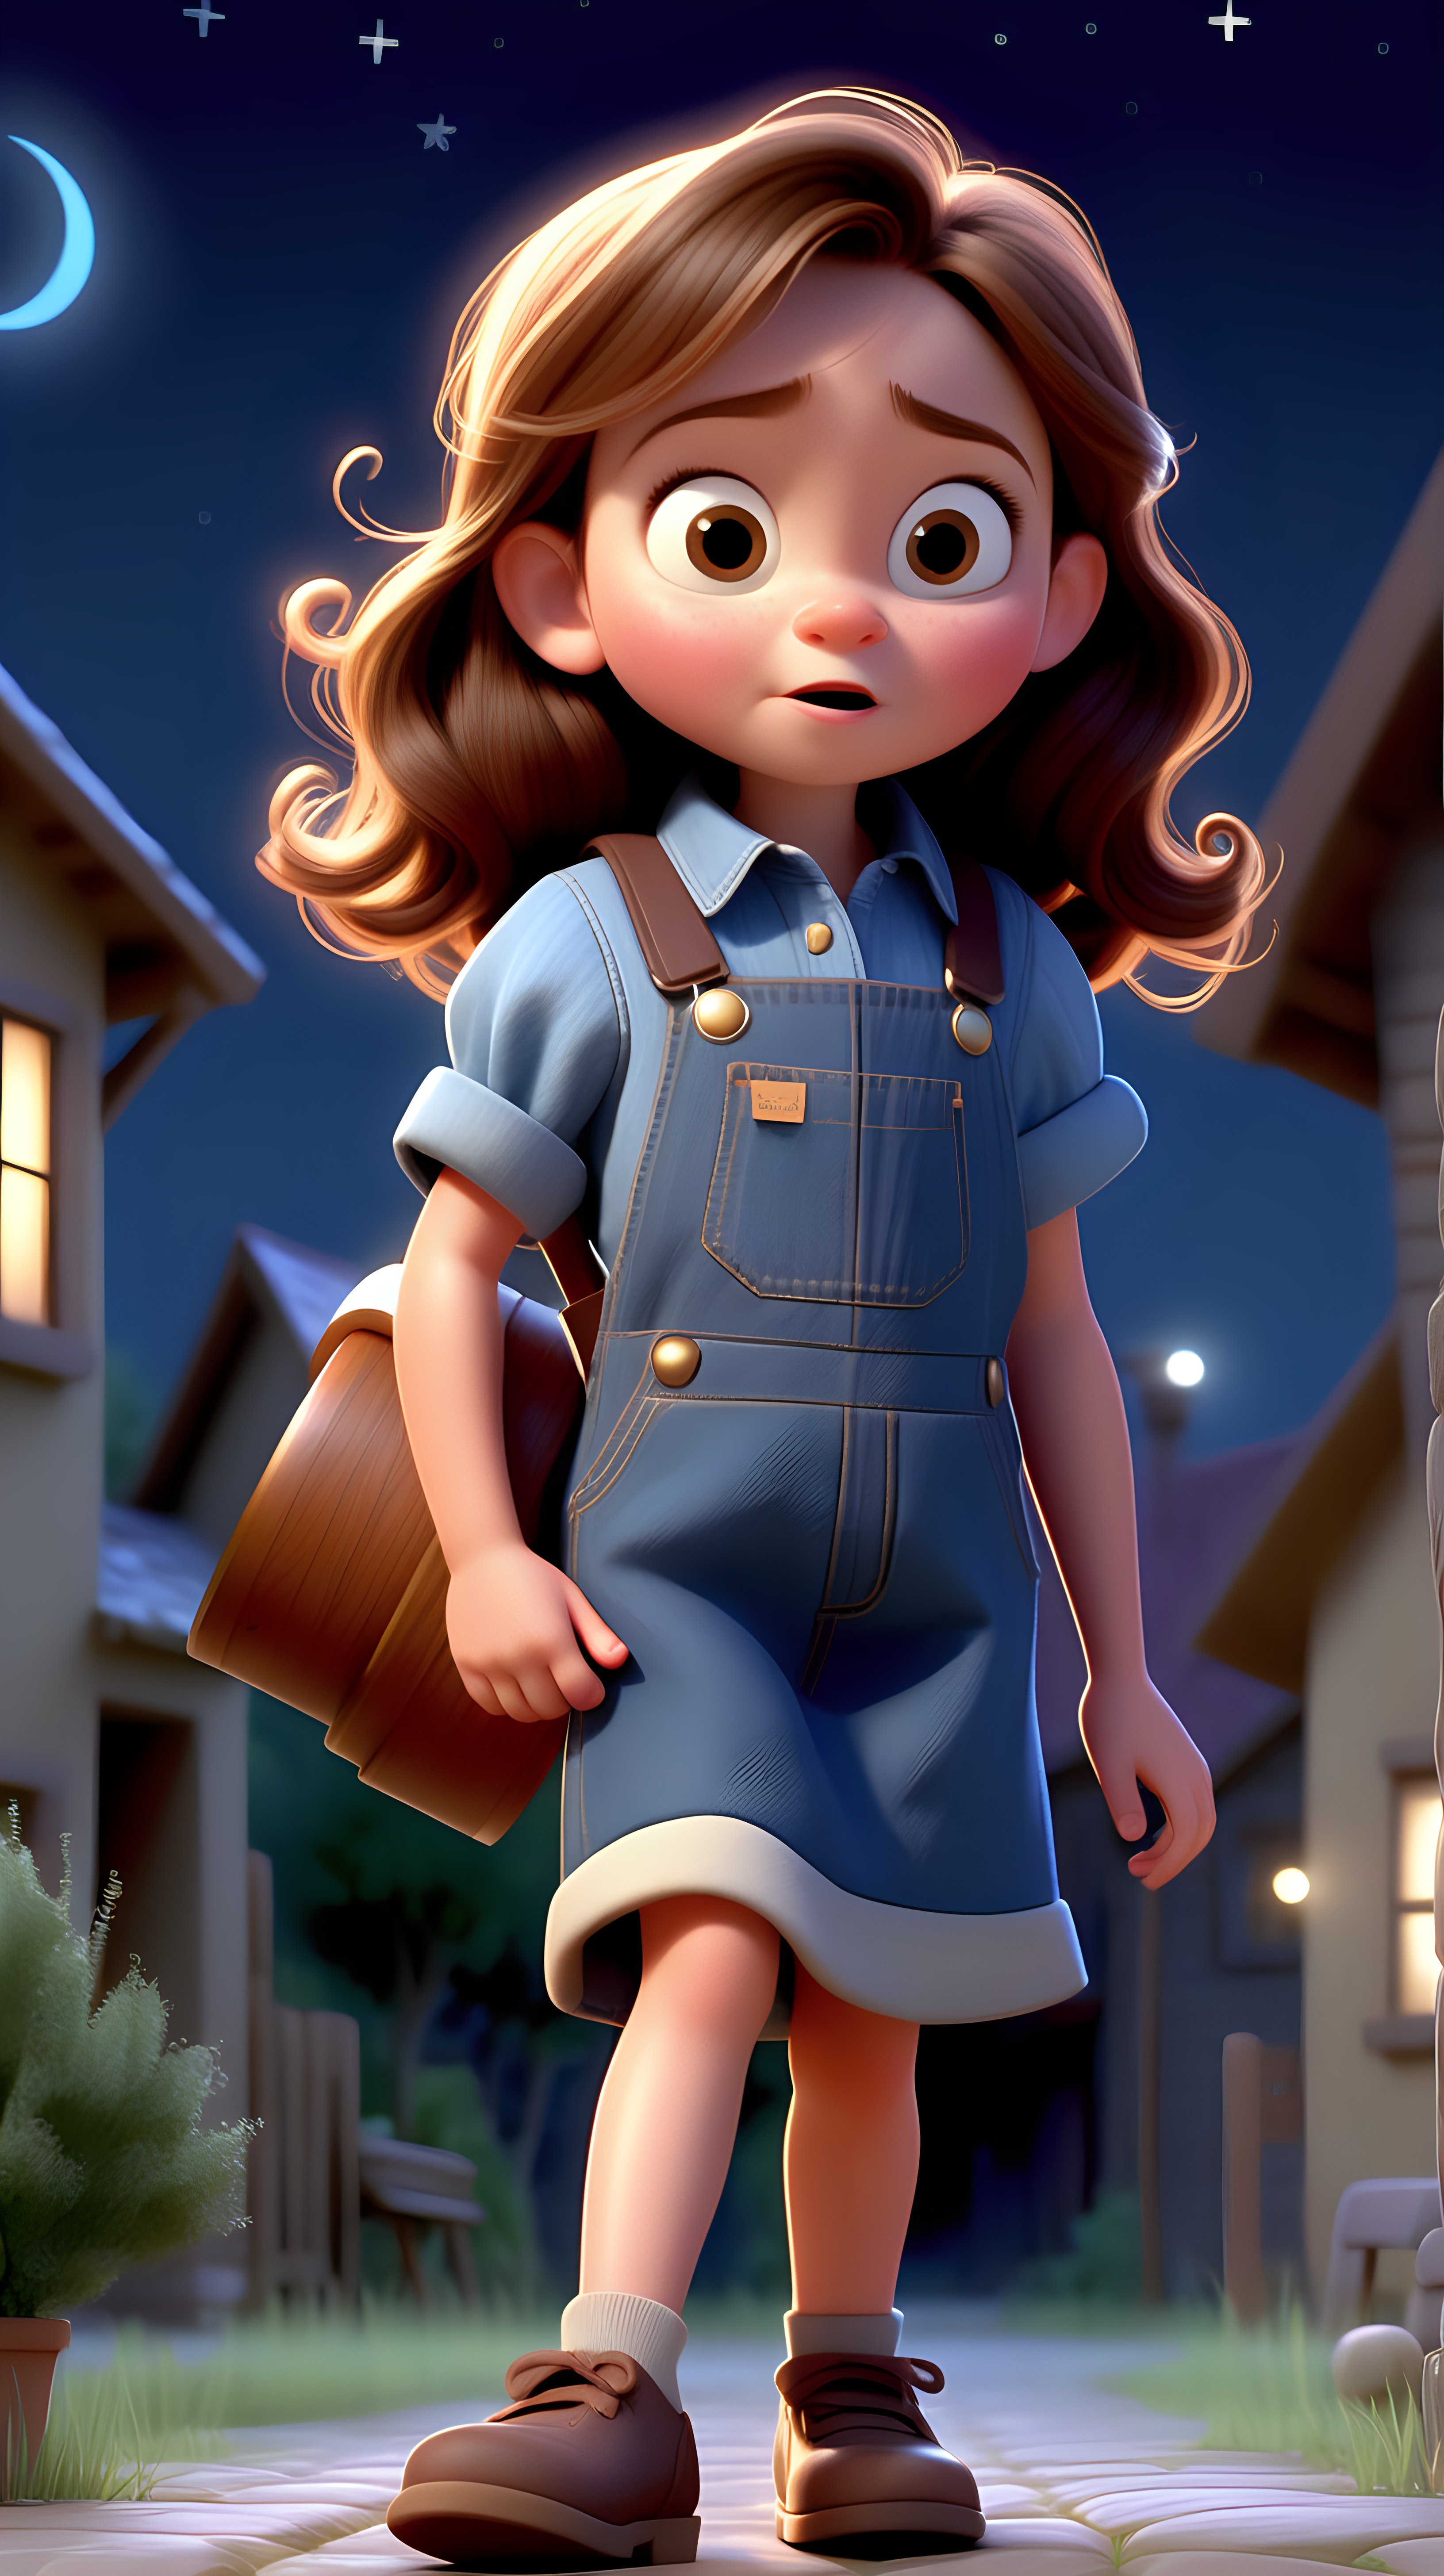 imagine 4 year old small girl with brown hair, fair skin, light brown eyes, wearing a denim dress overall, and a blue shirt, use Pixar style animation, make it full body size, in a village at nightholding a telescope, zoom out the image